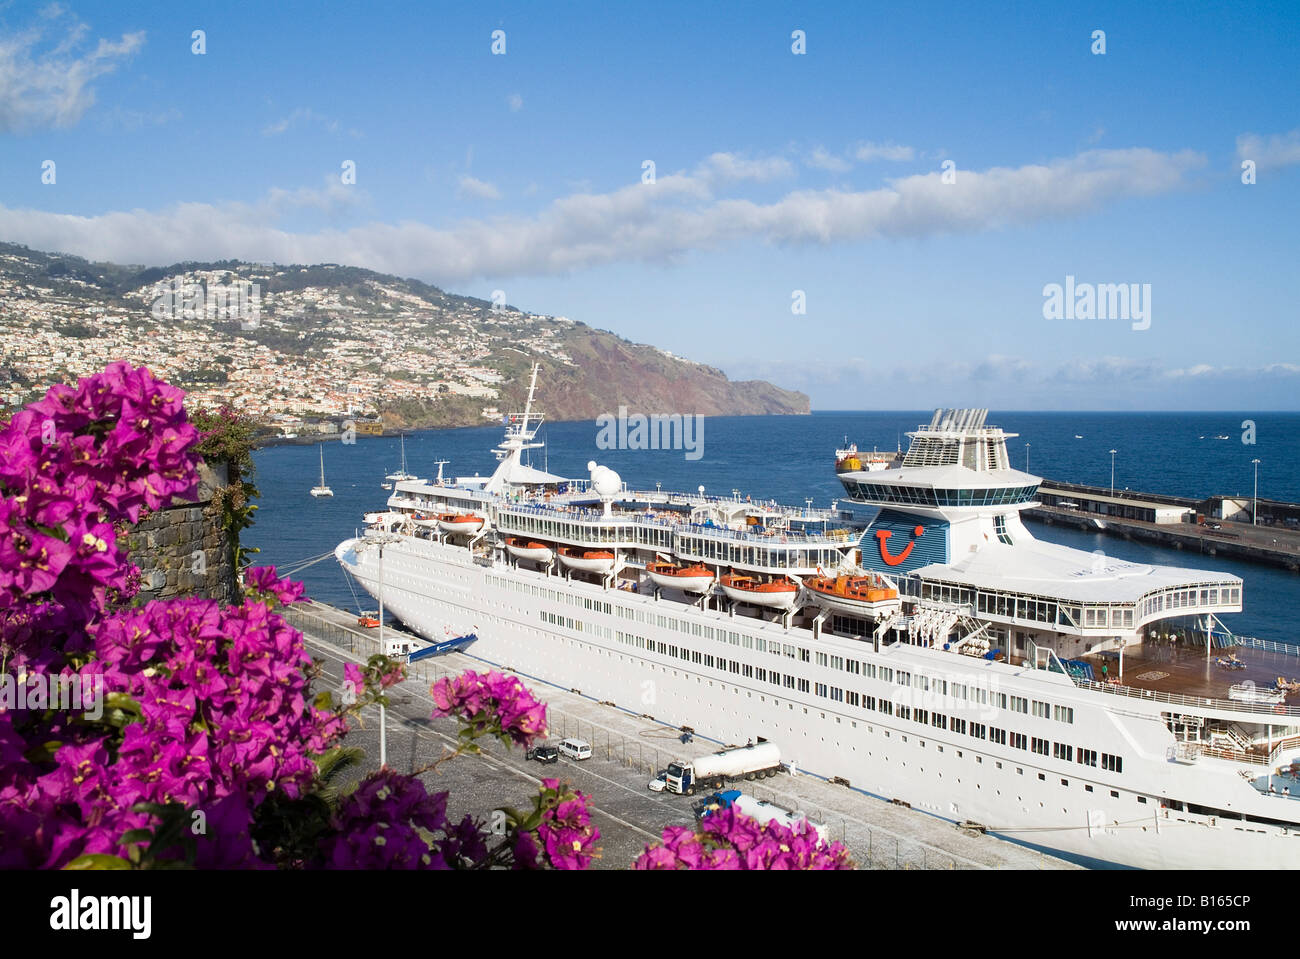 dh Funchal bay harbour port FUNCHAL MADEIRA Thomson Destiny passenger cruise liner Bay ship docked at cruises terminal Stock Photo